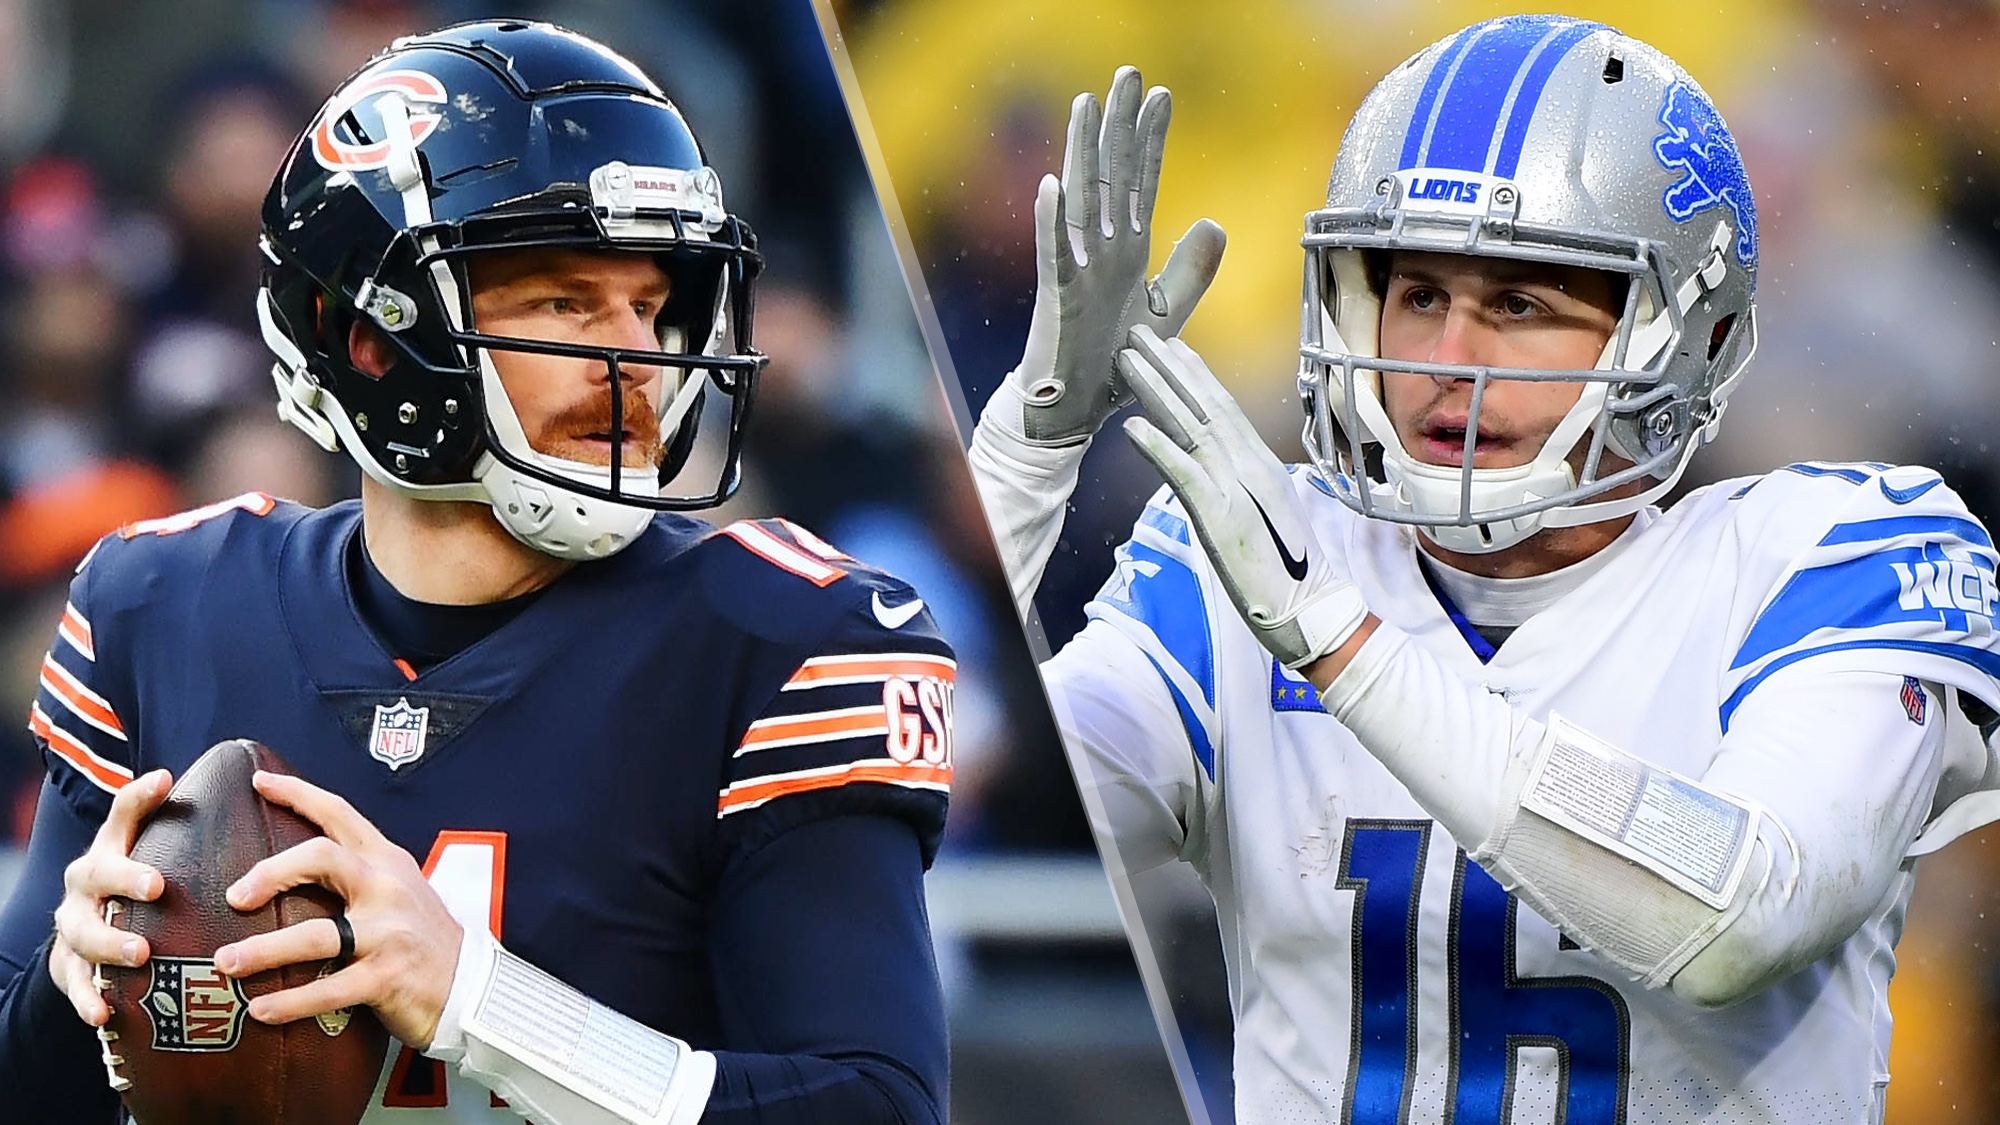 How to watch Lions vs. Bears: NFL live stream info, TV channel